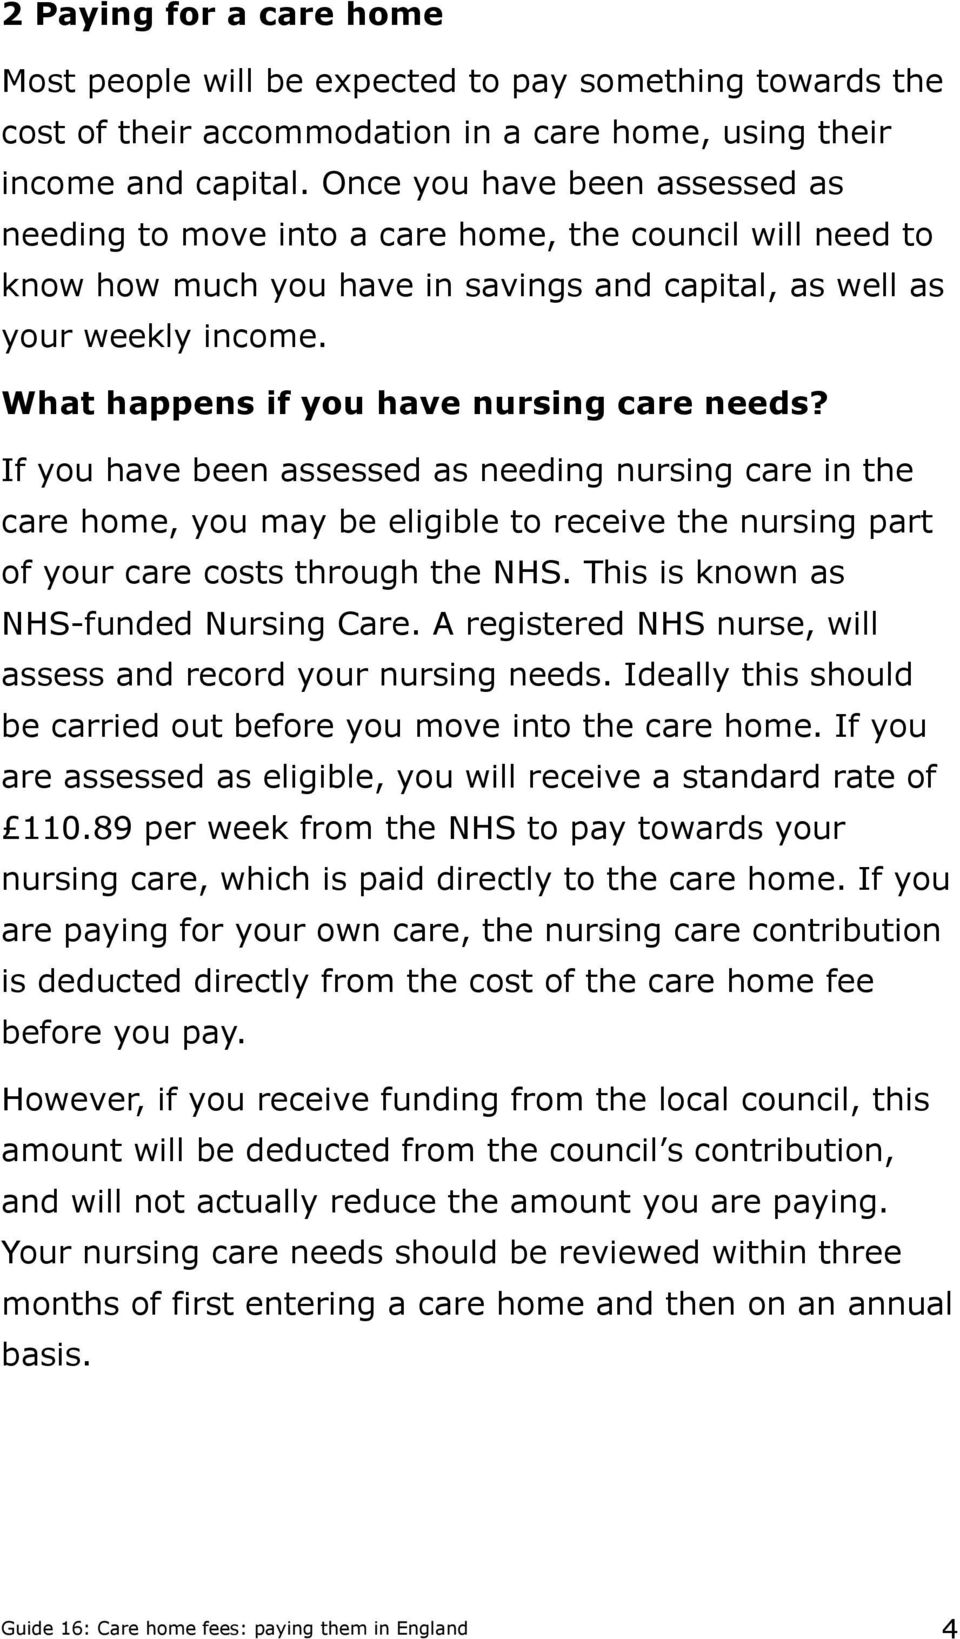 What happens if you have nursing care needs? If you have been assessed as needing nursing care in the care home, you may be eligible to receive the nursing part of your care costs through the NHS.